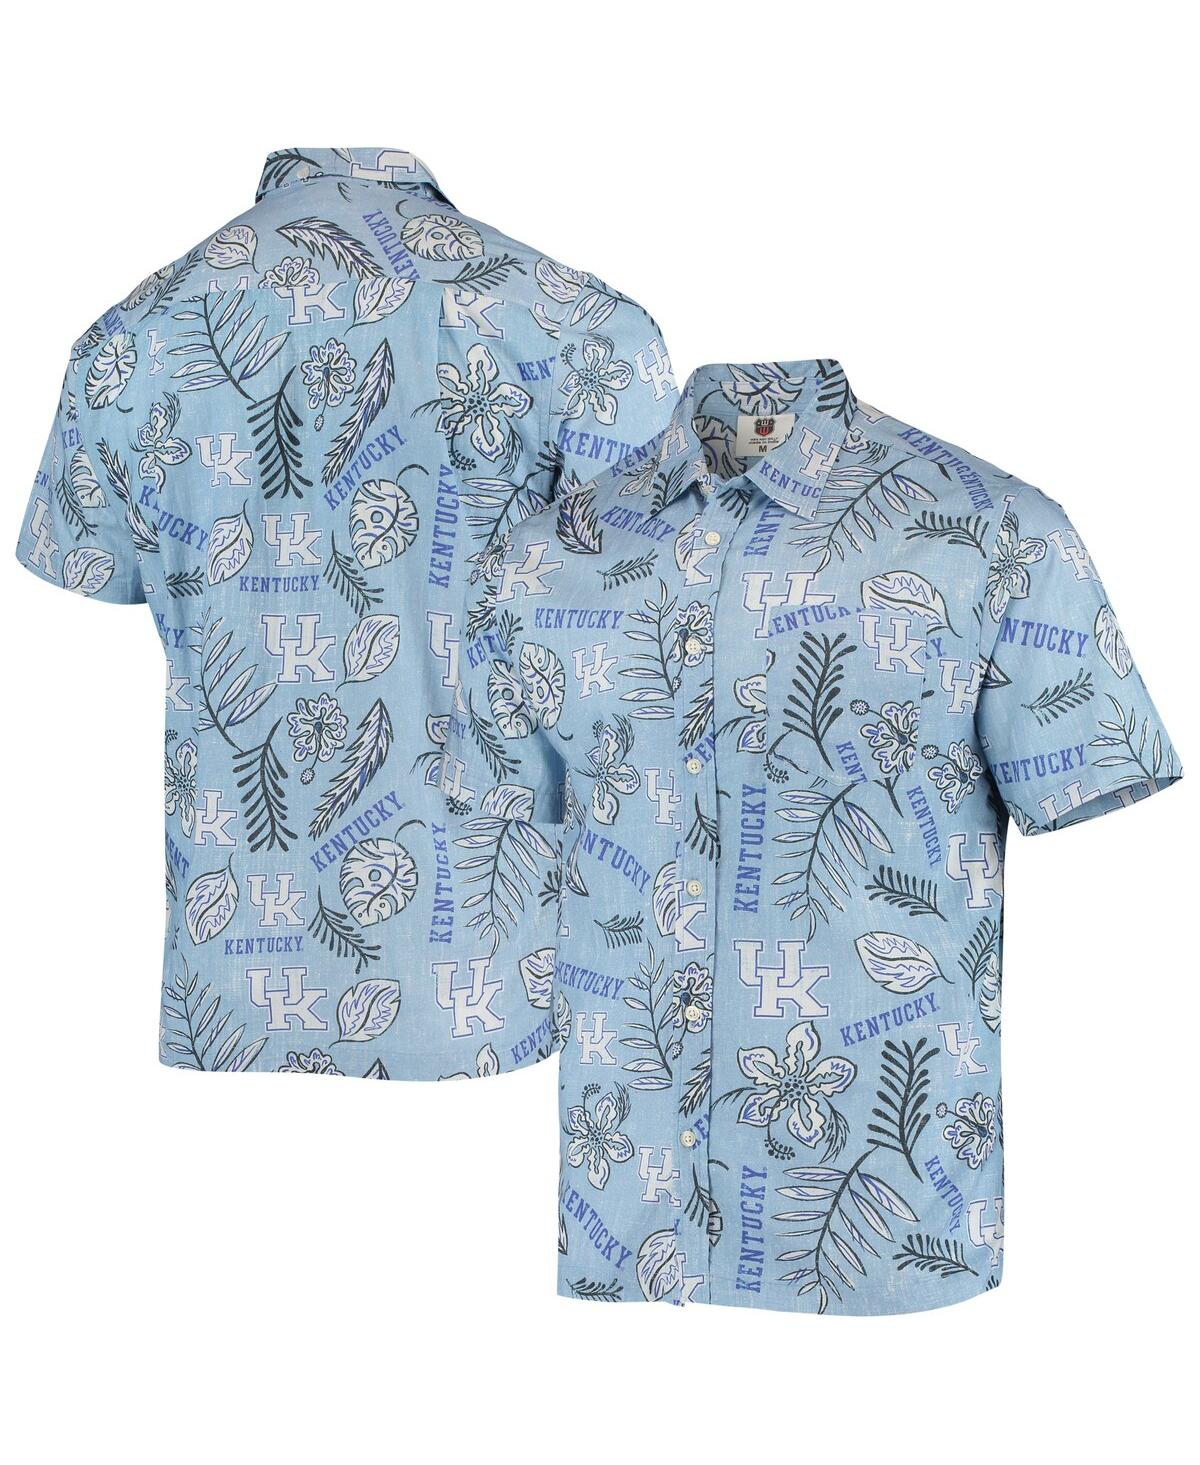 Shop Wes & Willy Men's  Light Blue Kentucky Wildcats Vintage-like Floral Button-up Shirt